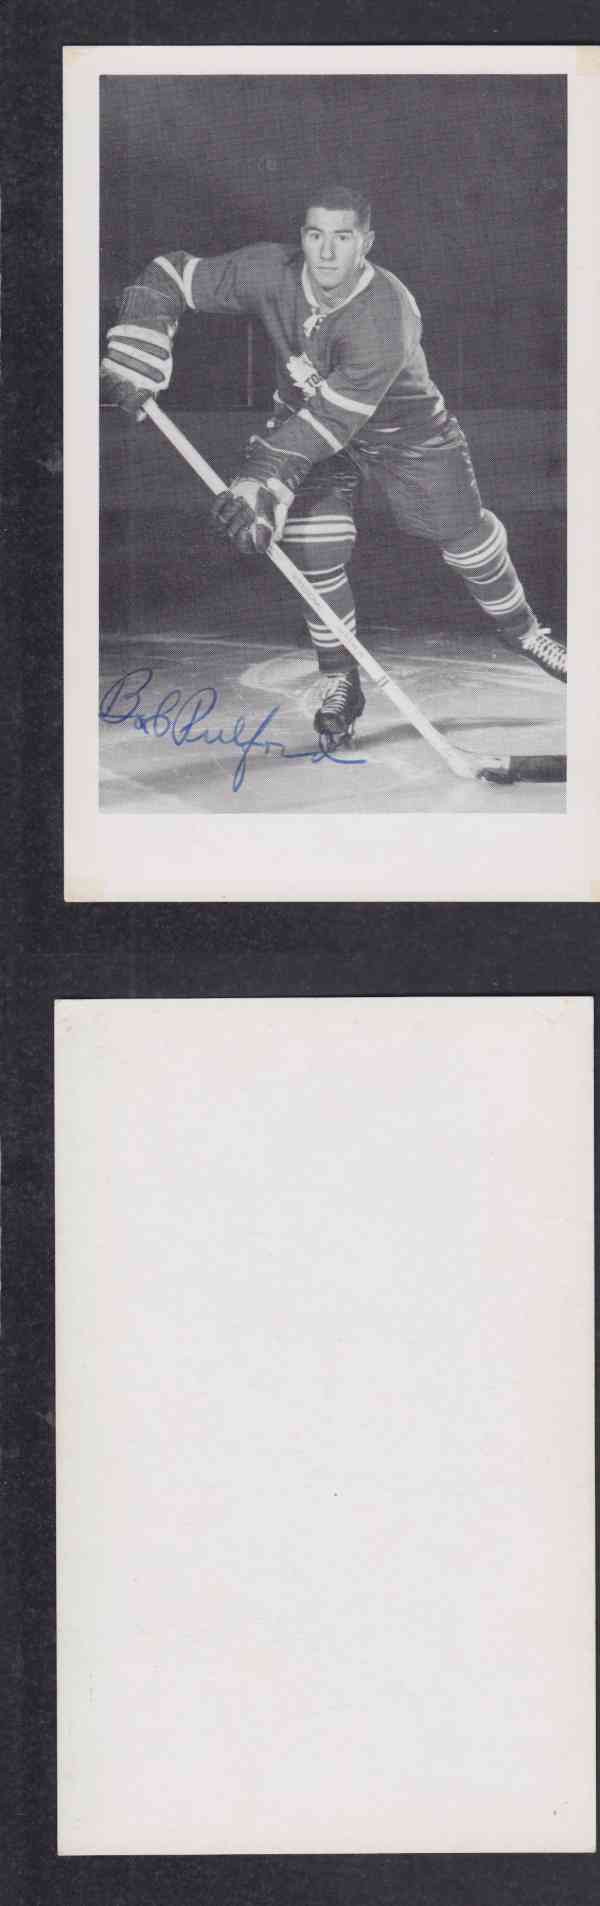 1960 'S TORONTO MAPLE LEAFS B.PULFORD  AUTOGRAPHED POST CARD photo